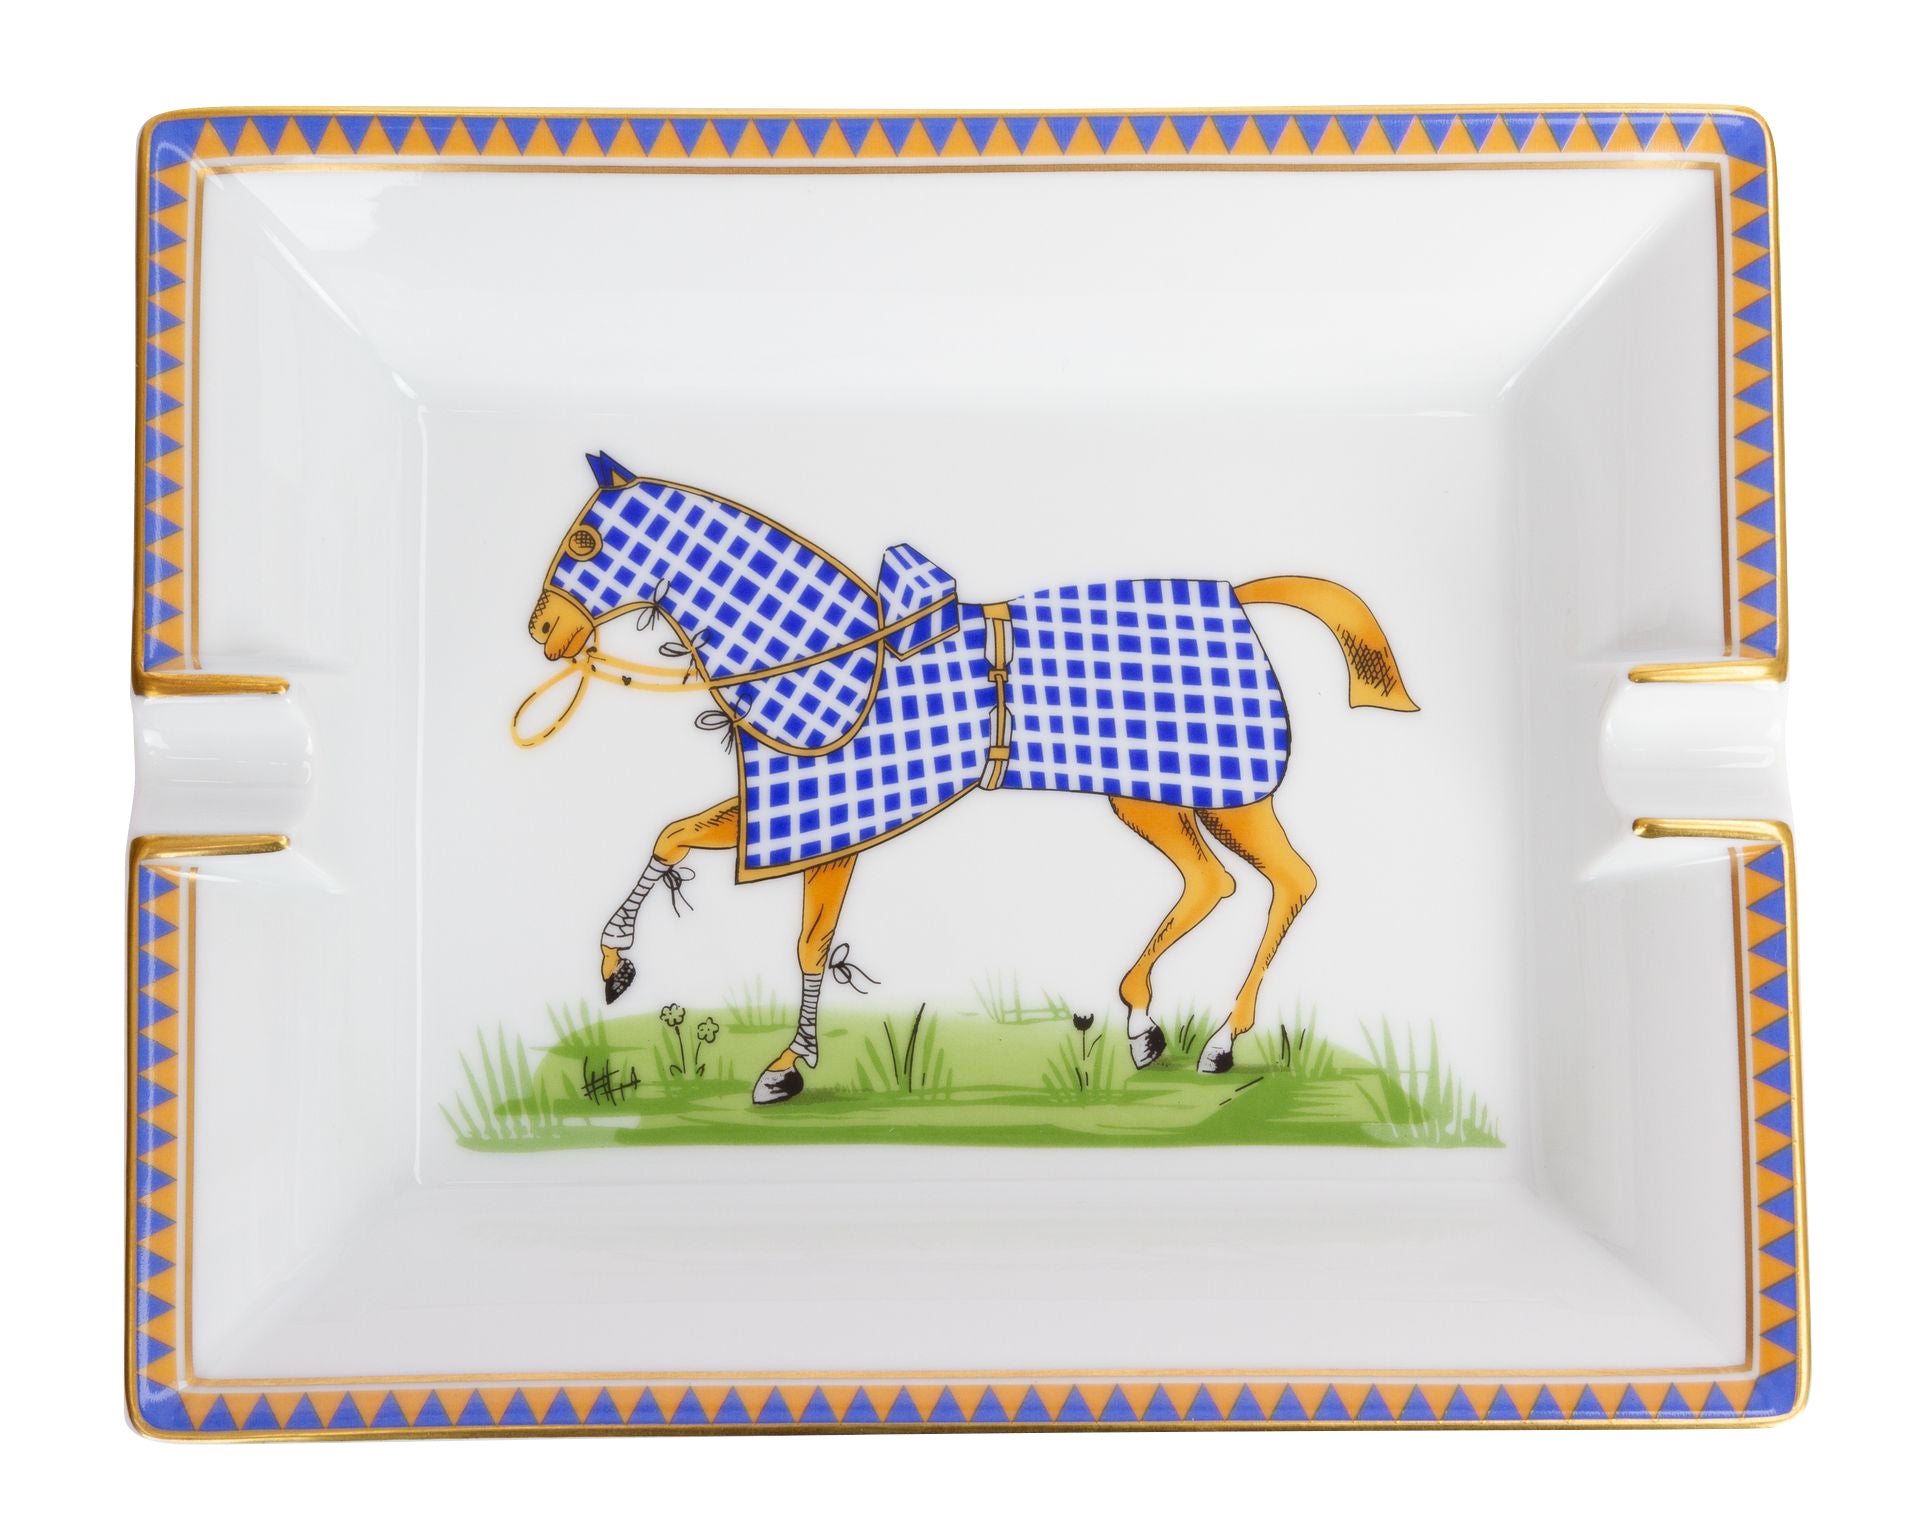 HERMES AUTHENTIC VINTAGE Collectable Porcelain Horse Ashtray Made